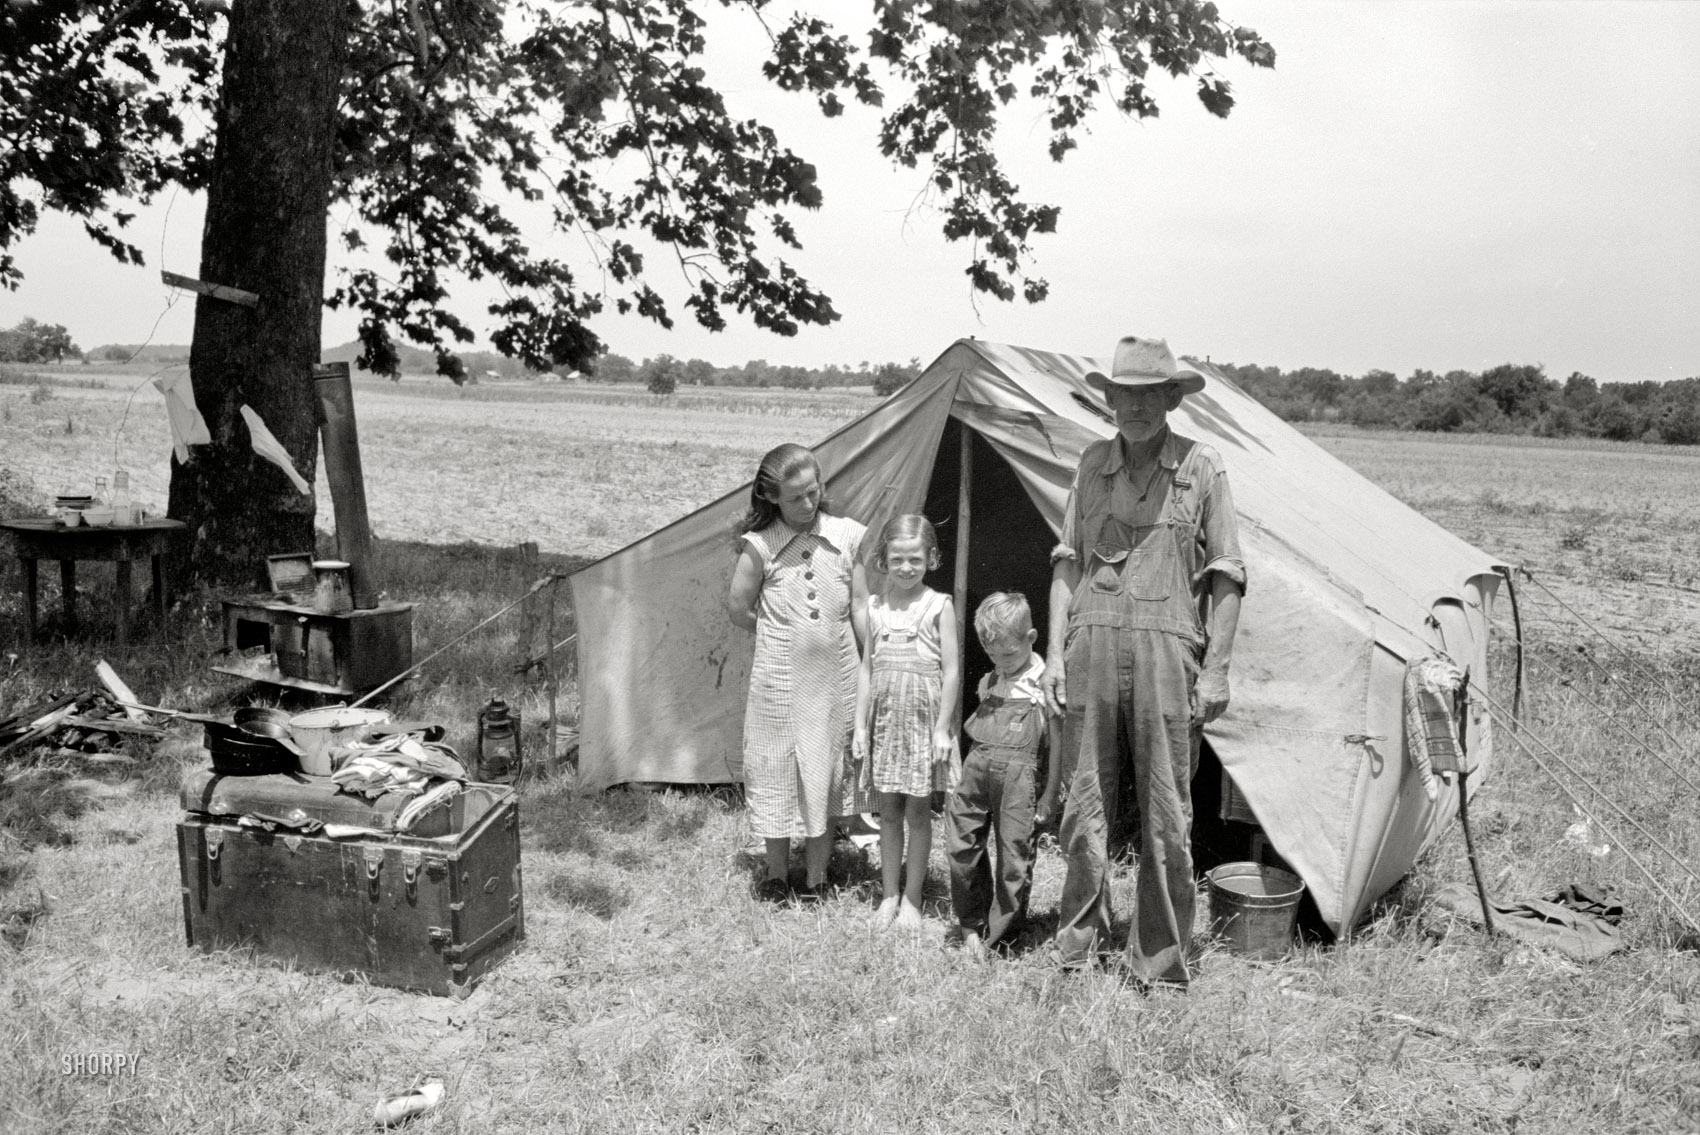 June 1939. "Wagoner County, Oklahoma. Veteran migrant agricultural worker and his family encamped on the Arkansas River." Our third look at this grizzled laborer (One, Two). 35mm negative by Russell Lee for the FSA. View full size.